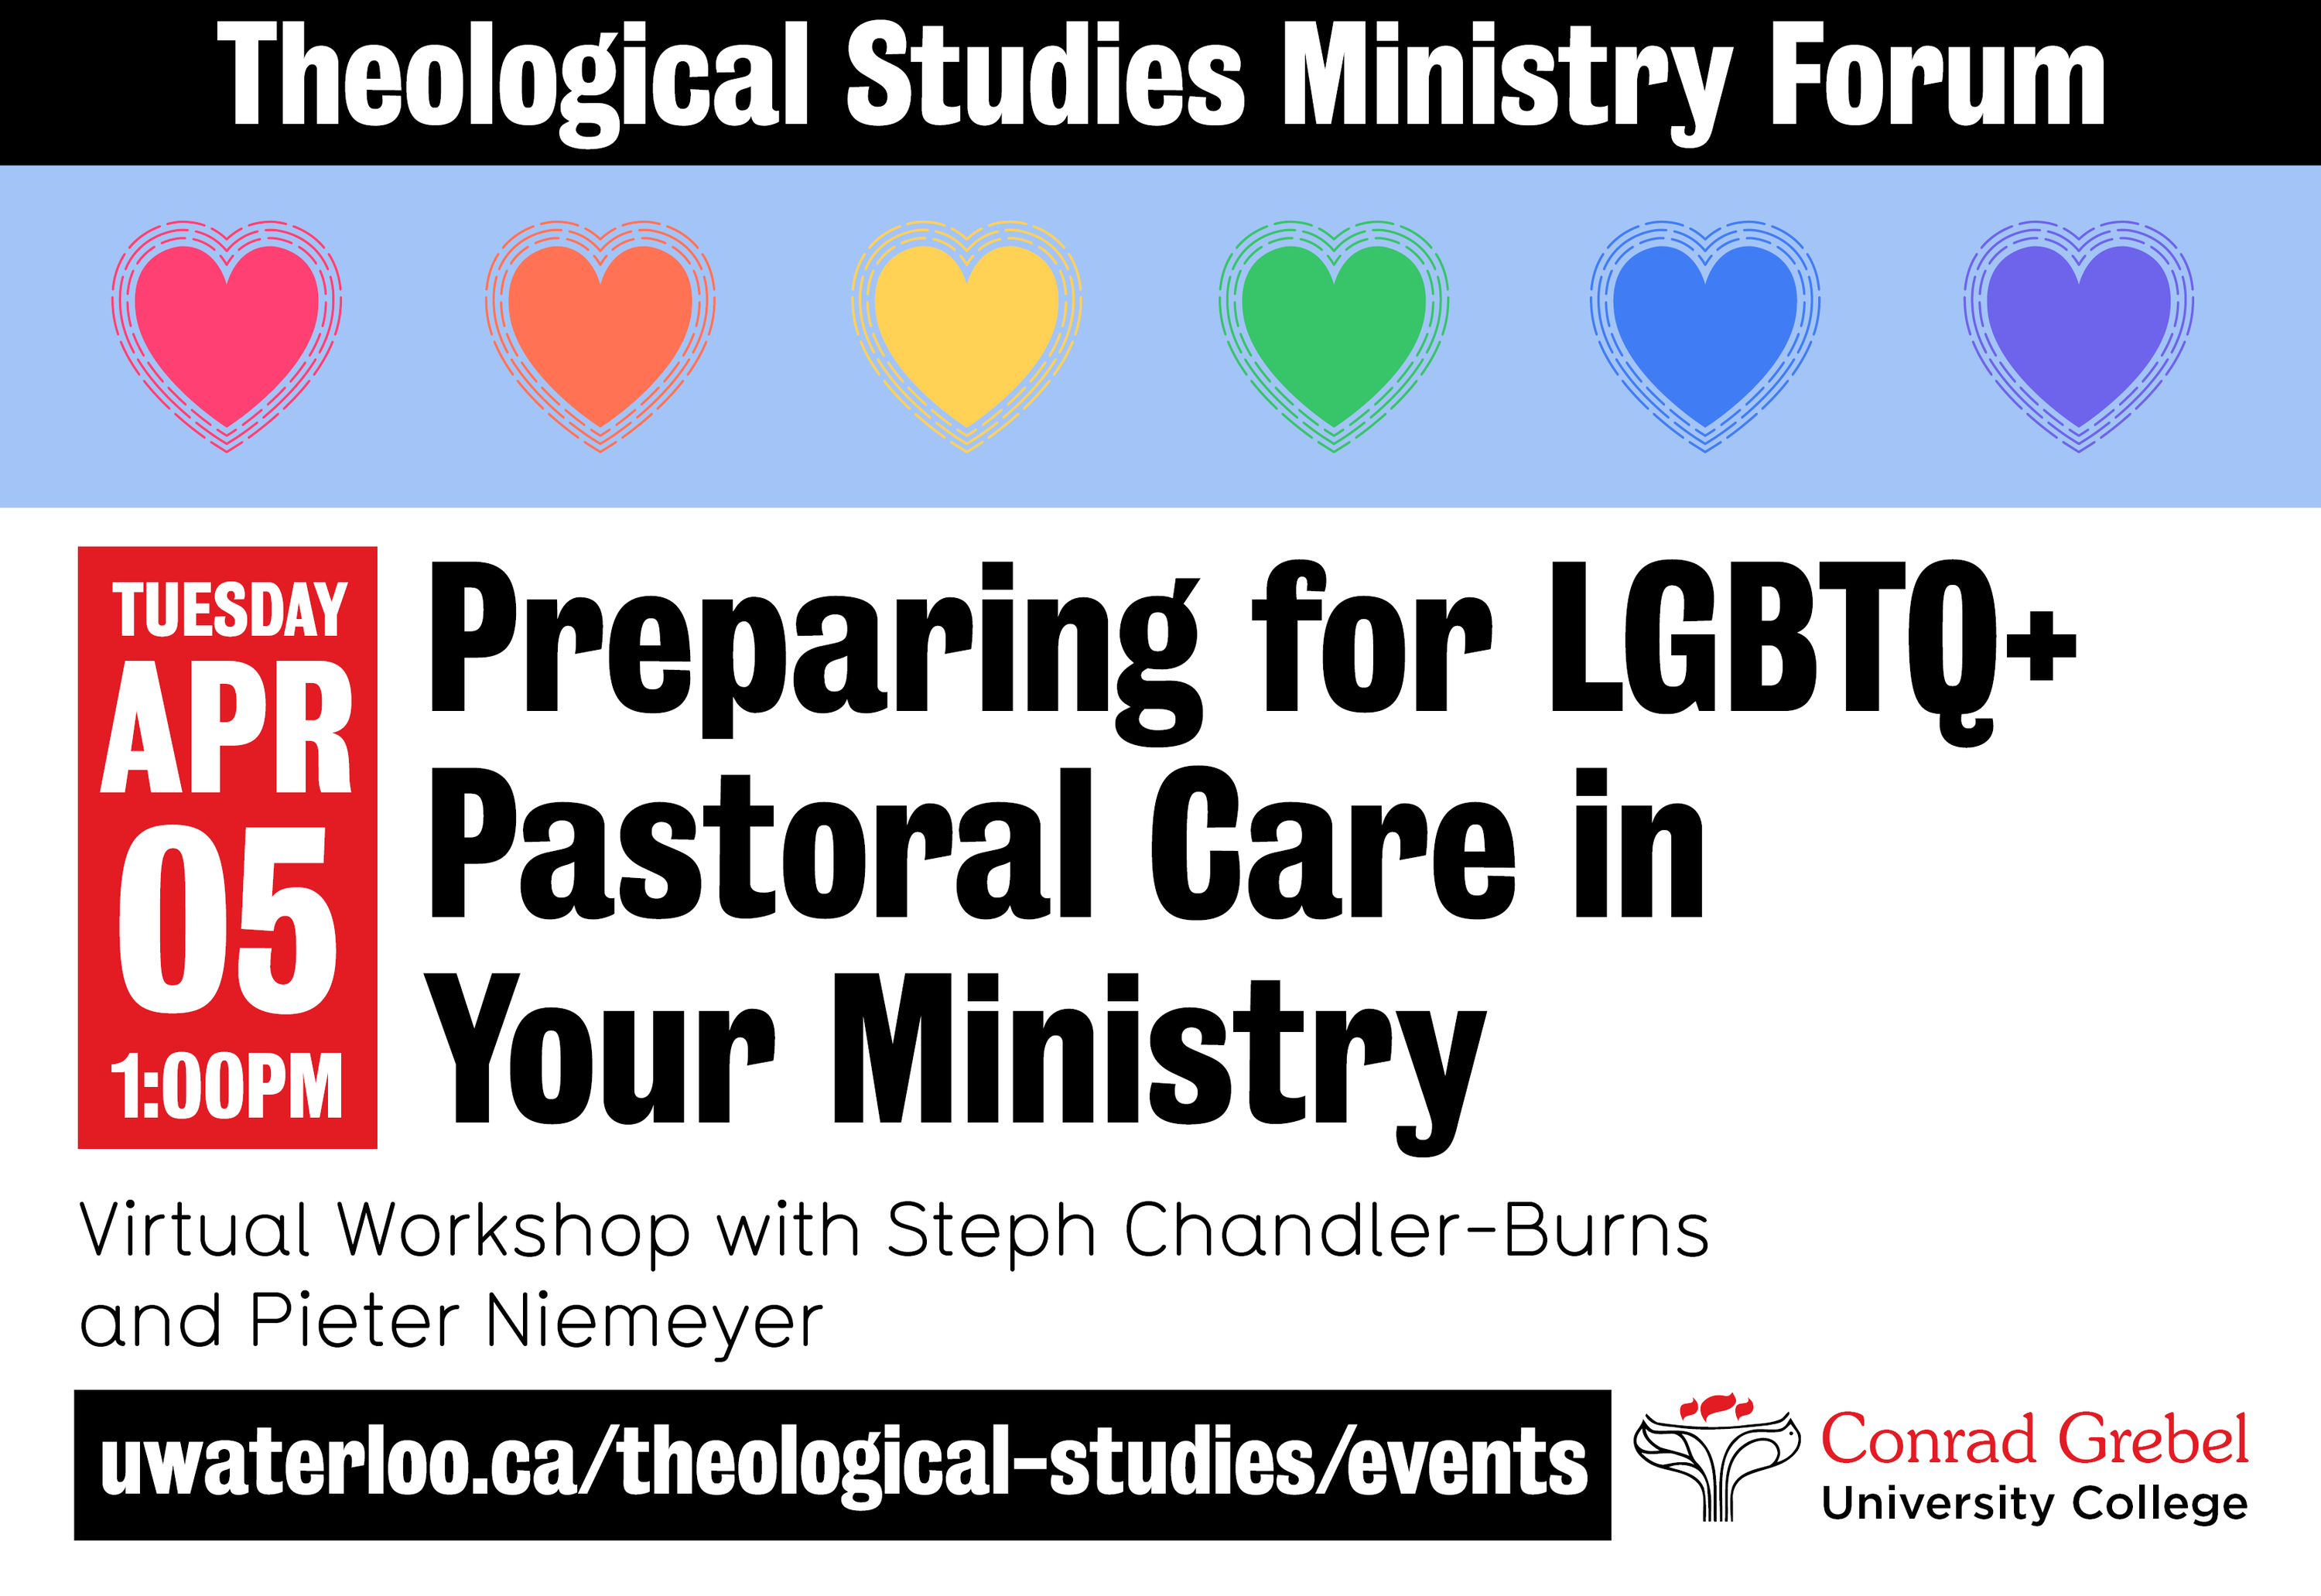 Preparing for LGBTQ+ Pastral Care in Your Ministry